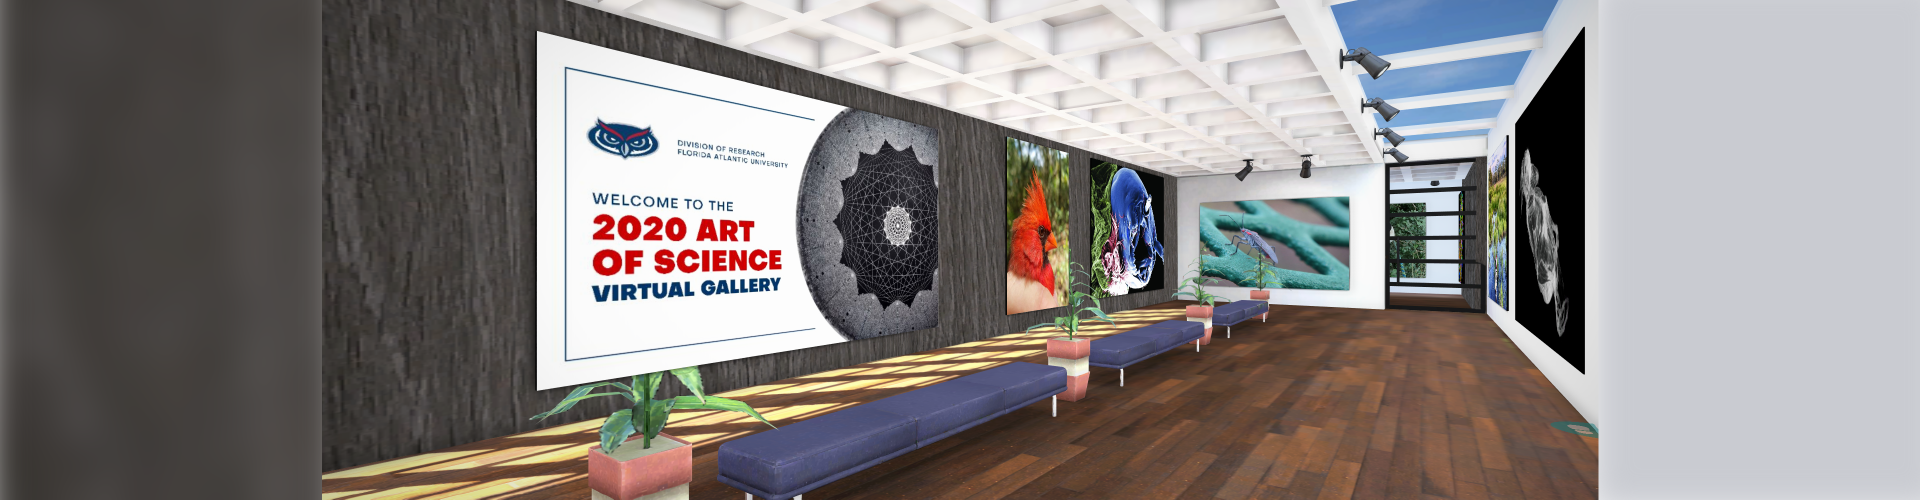 Get Immersed in a Virtual Gallery